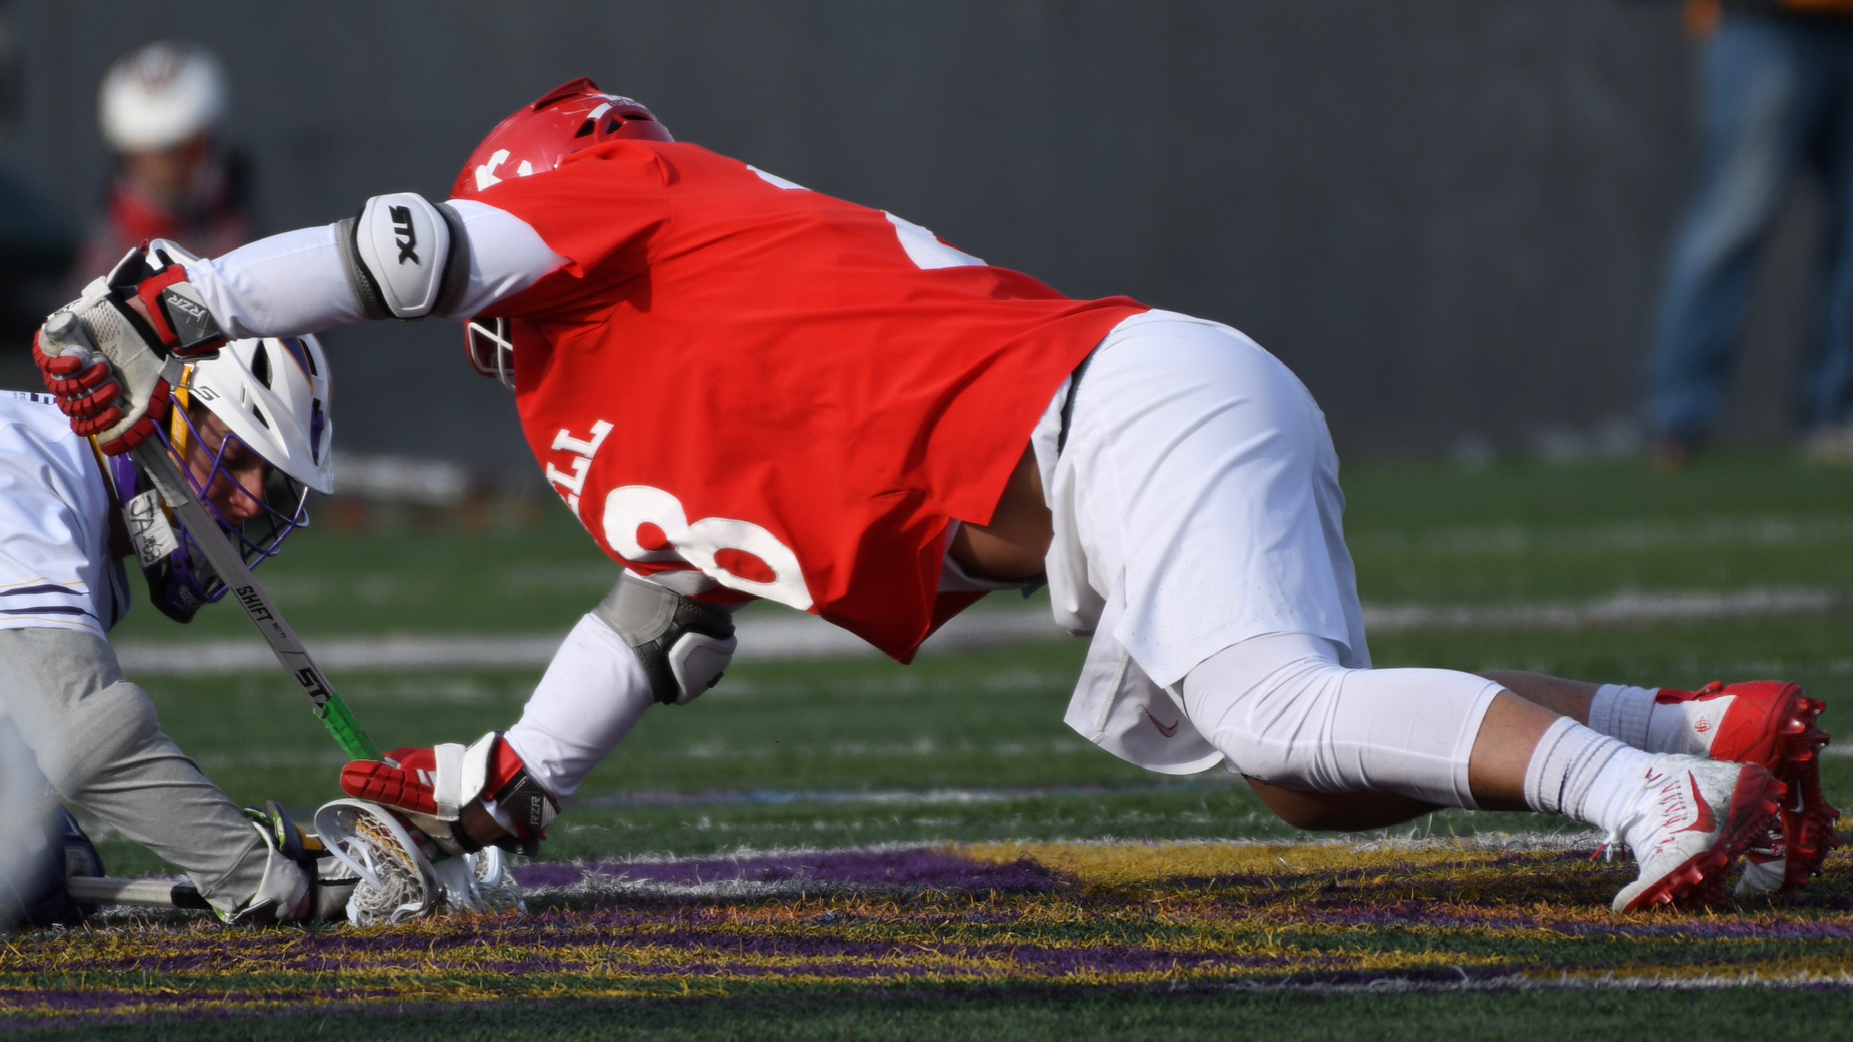 The Cornell Big Red men’s lacrosse team competes against Albany on the road on Feb. 15, 2020 in Albany, NY.